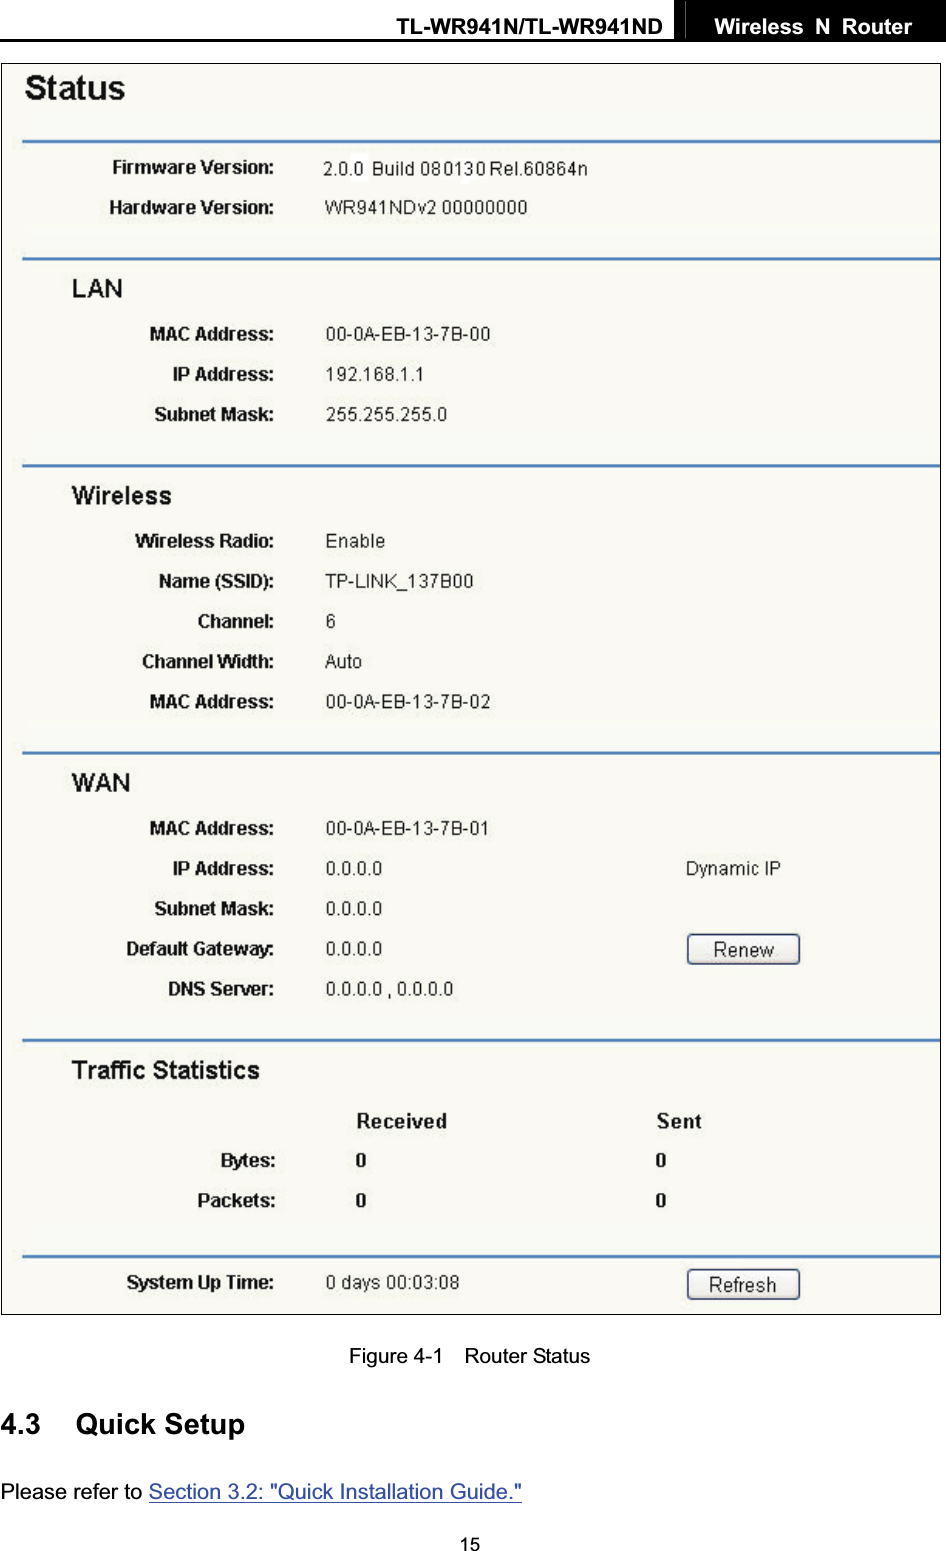 TL-WR941N/TL-WR941ND  Wireless N Router  15Figure 4-1    Router Status 4.3 Quick Setup Please refer to Section 3.2: &quot;Quick Installation Guide.&quot;